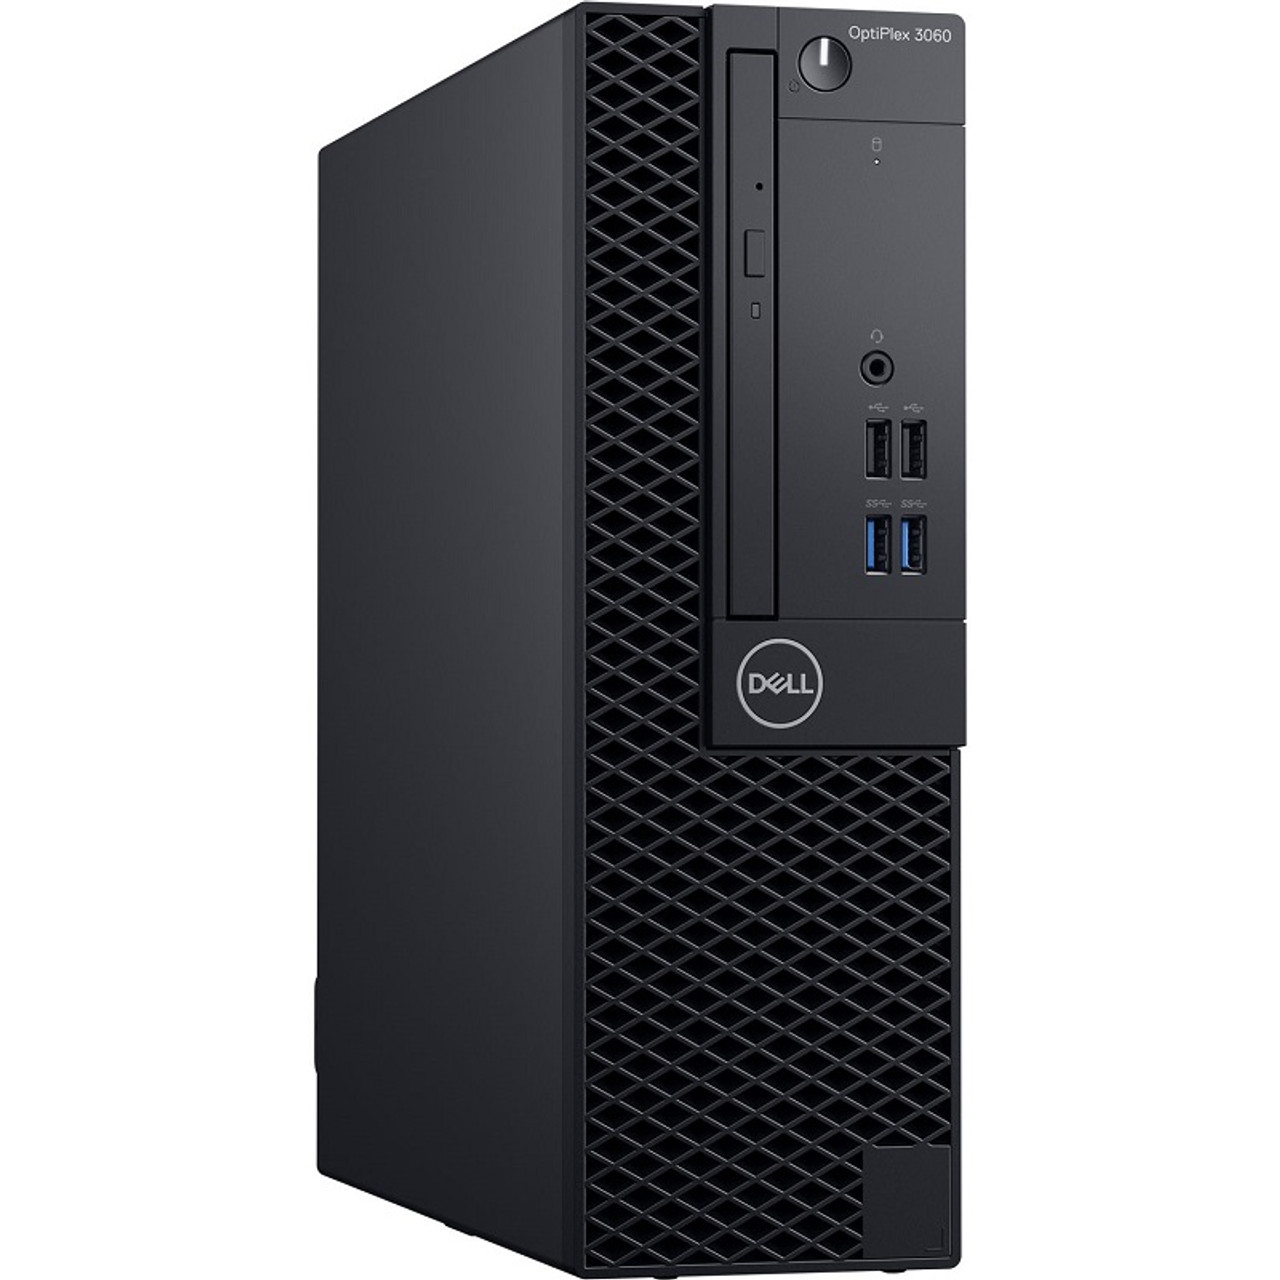 Dell OptiPlex 3060 SFF Intel Core i7-8700 3.2GHz up to 4.6GHz 32GB ...